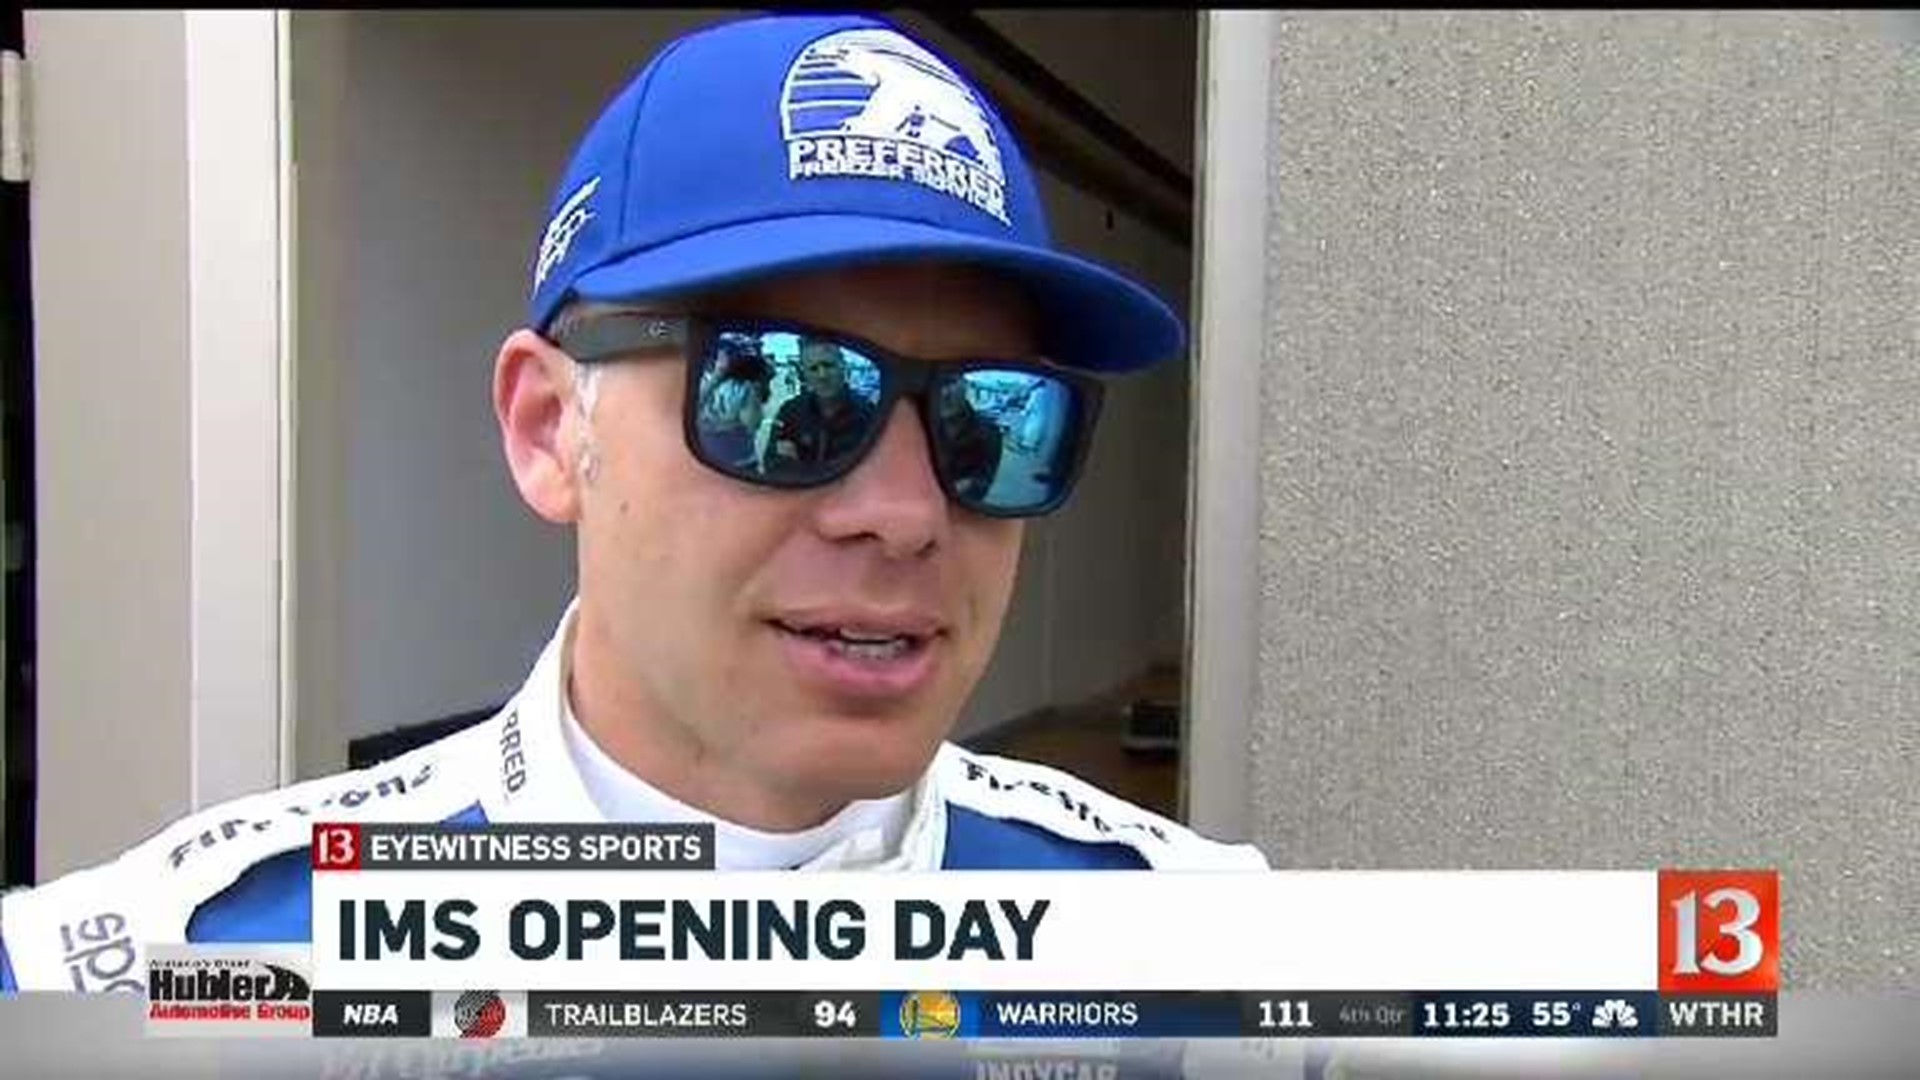 IMS Opening Day